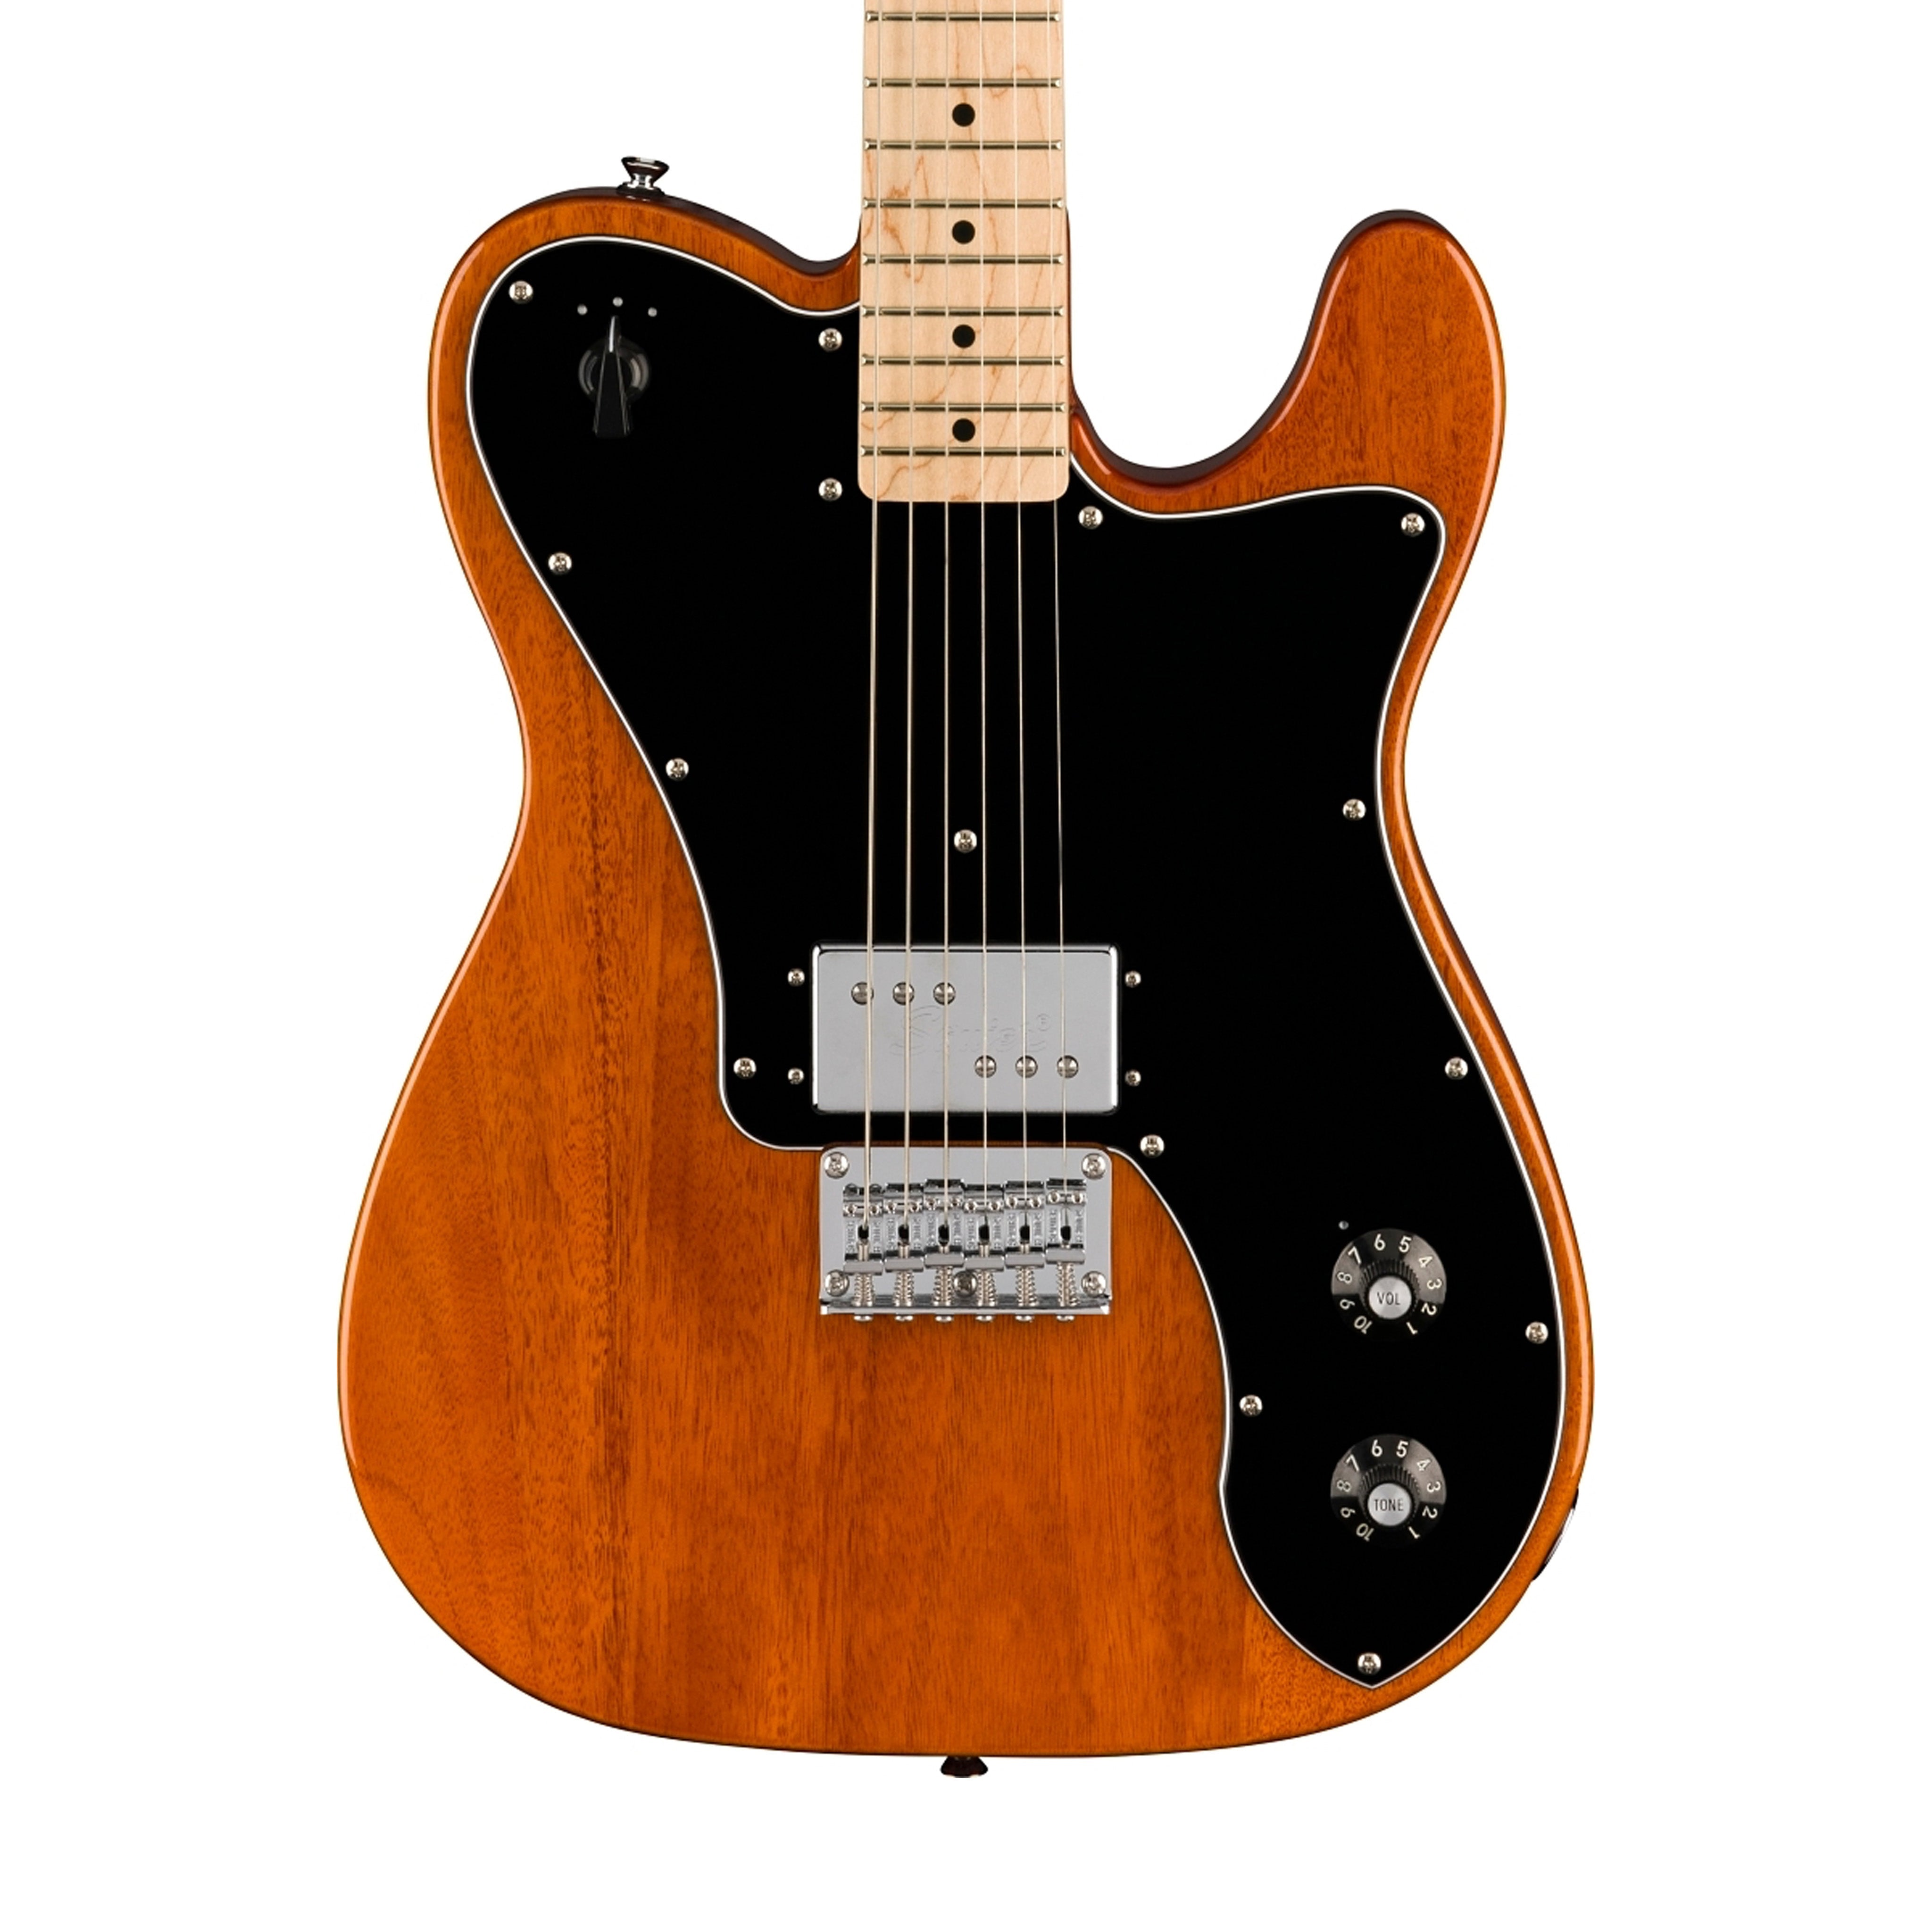 Squier Paranormal Esquire Deluxe Electric Guitar, Maple FB, Mocha | Zoso Music Sdn Bhd